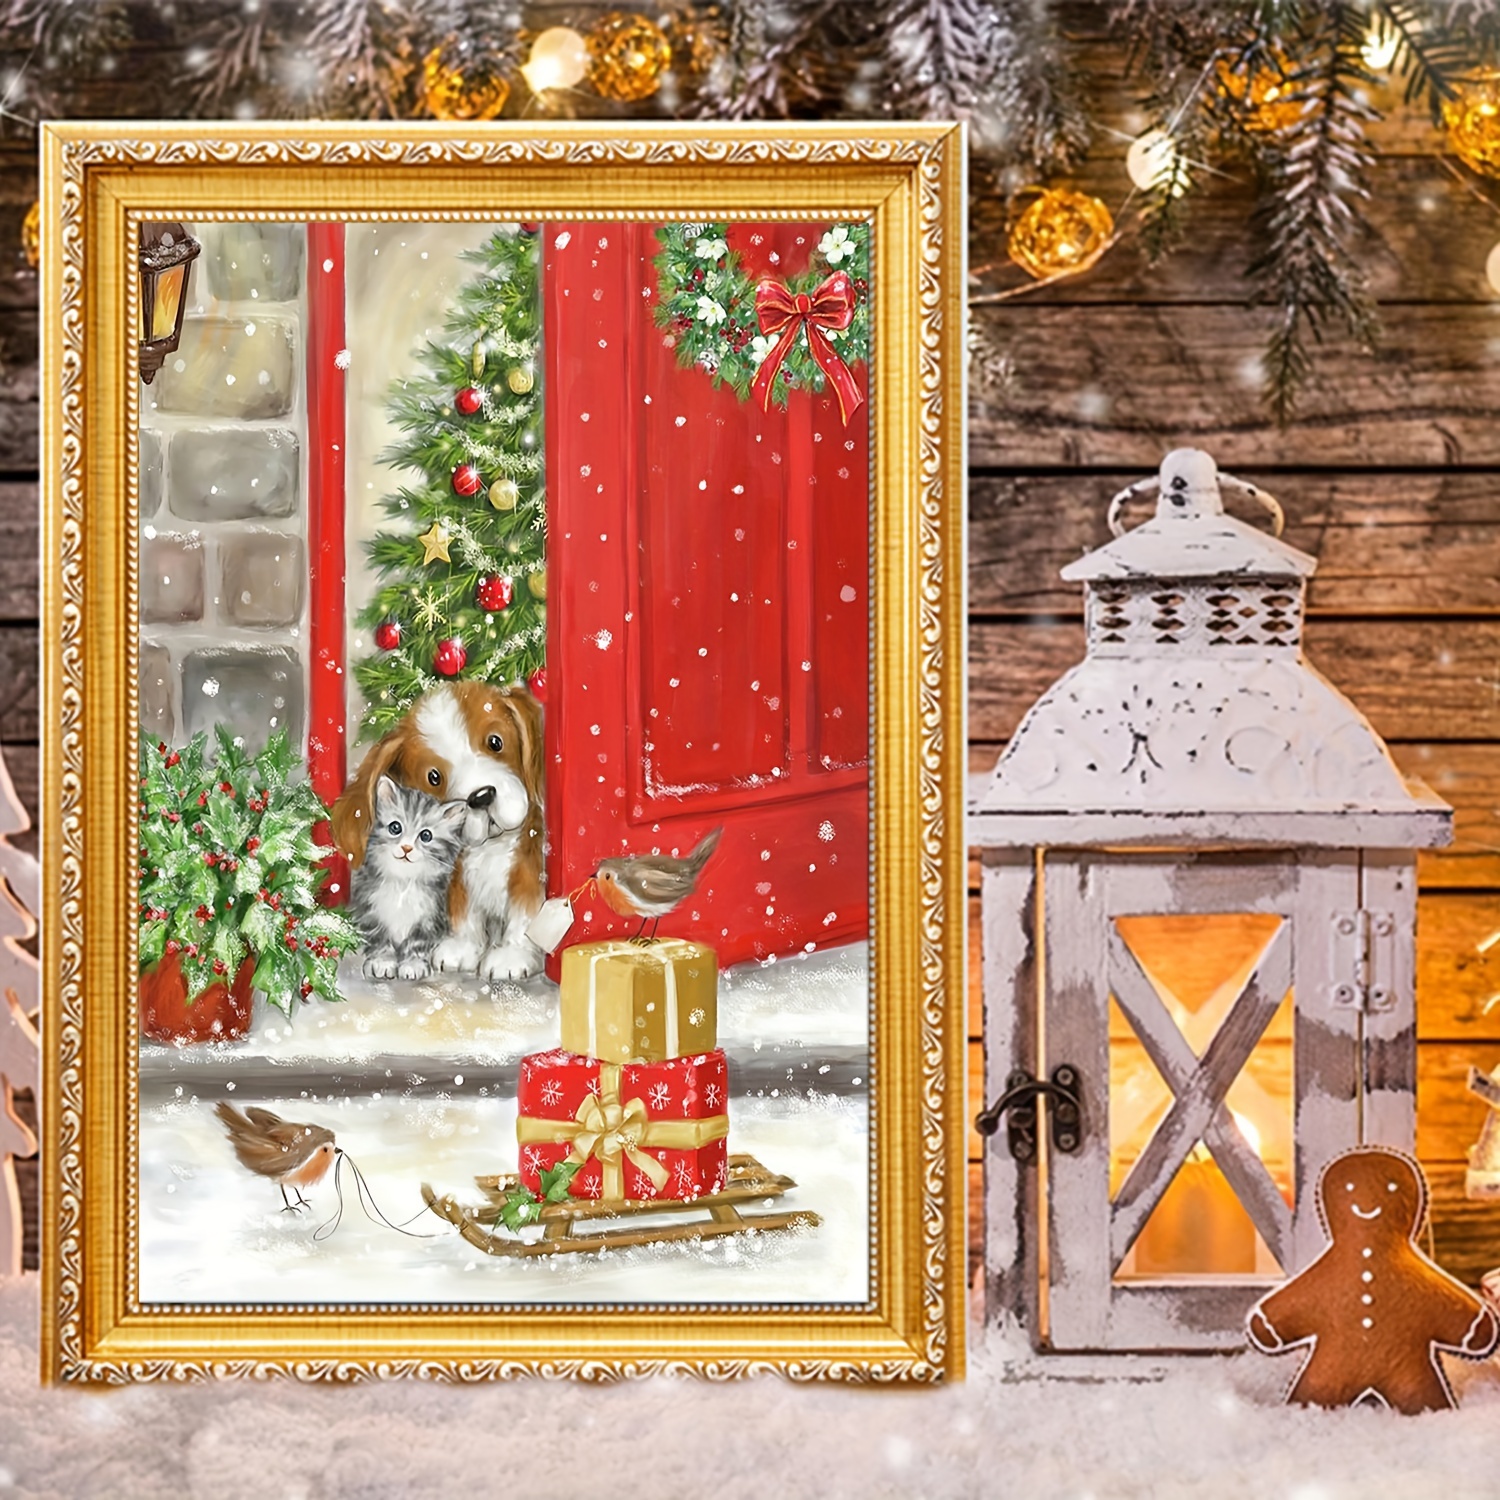 Christmas Diamond Painting Kits,Merry Christmas Diamond Art Kit for Adults,5D Paint with Diamond Full Drill for Parents-children Interaction,Wall